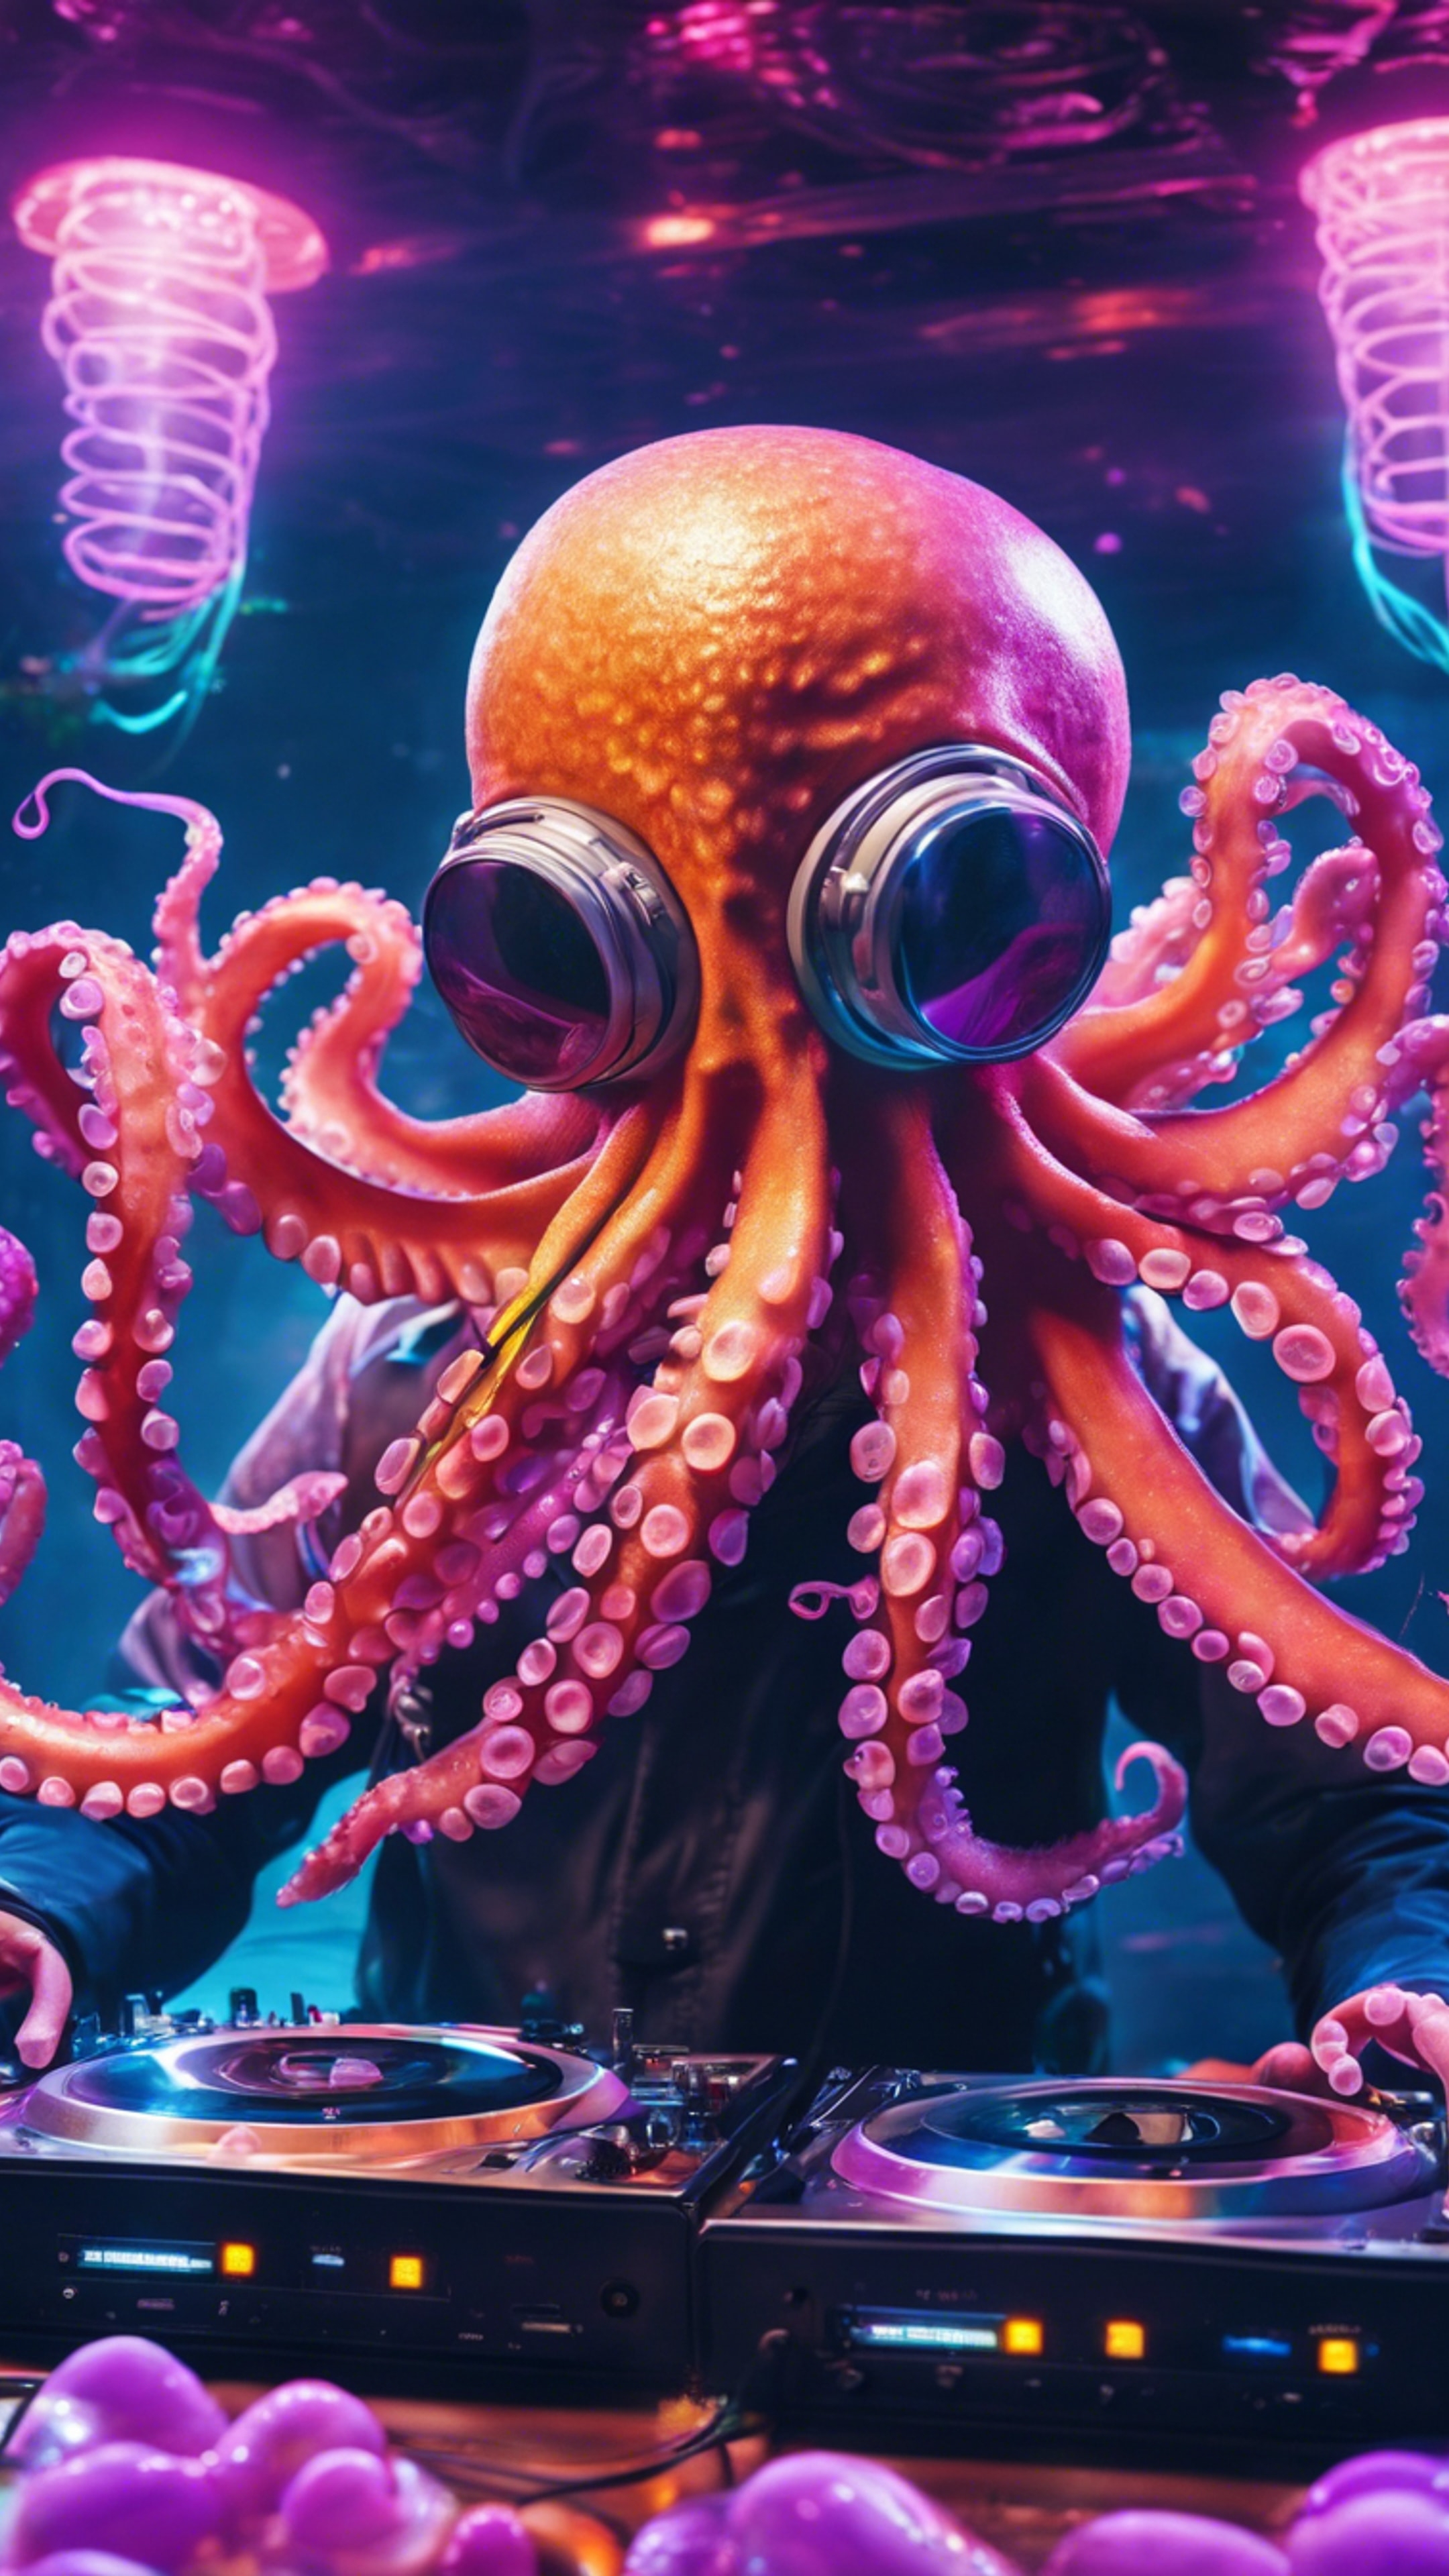 An octopus DJ controlling the music at an underwater rave amidst neon jellyfish. Tapet[8d0f478d59094f5192d2]